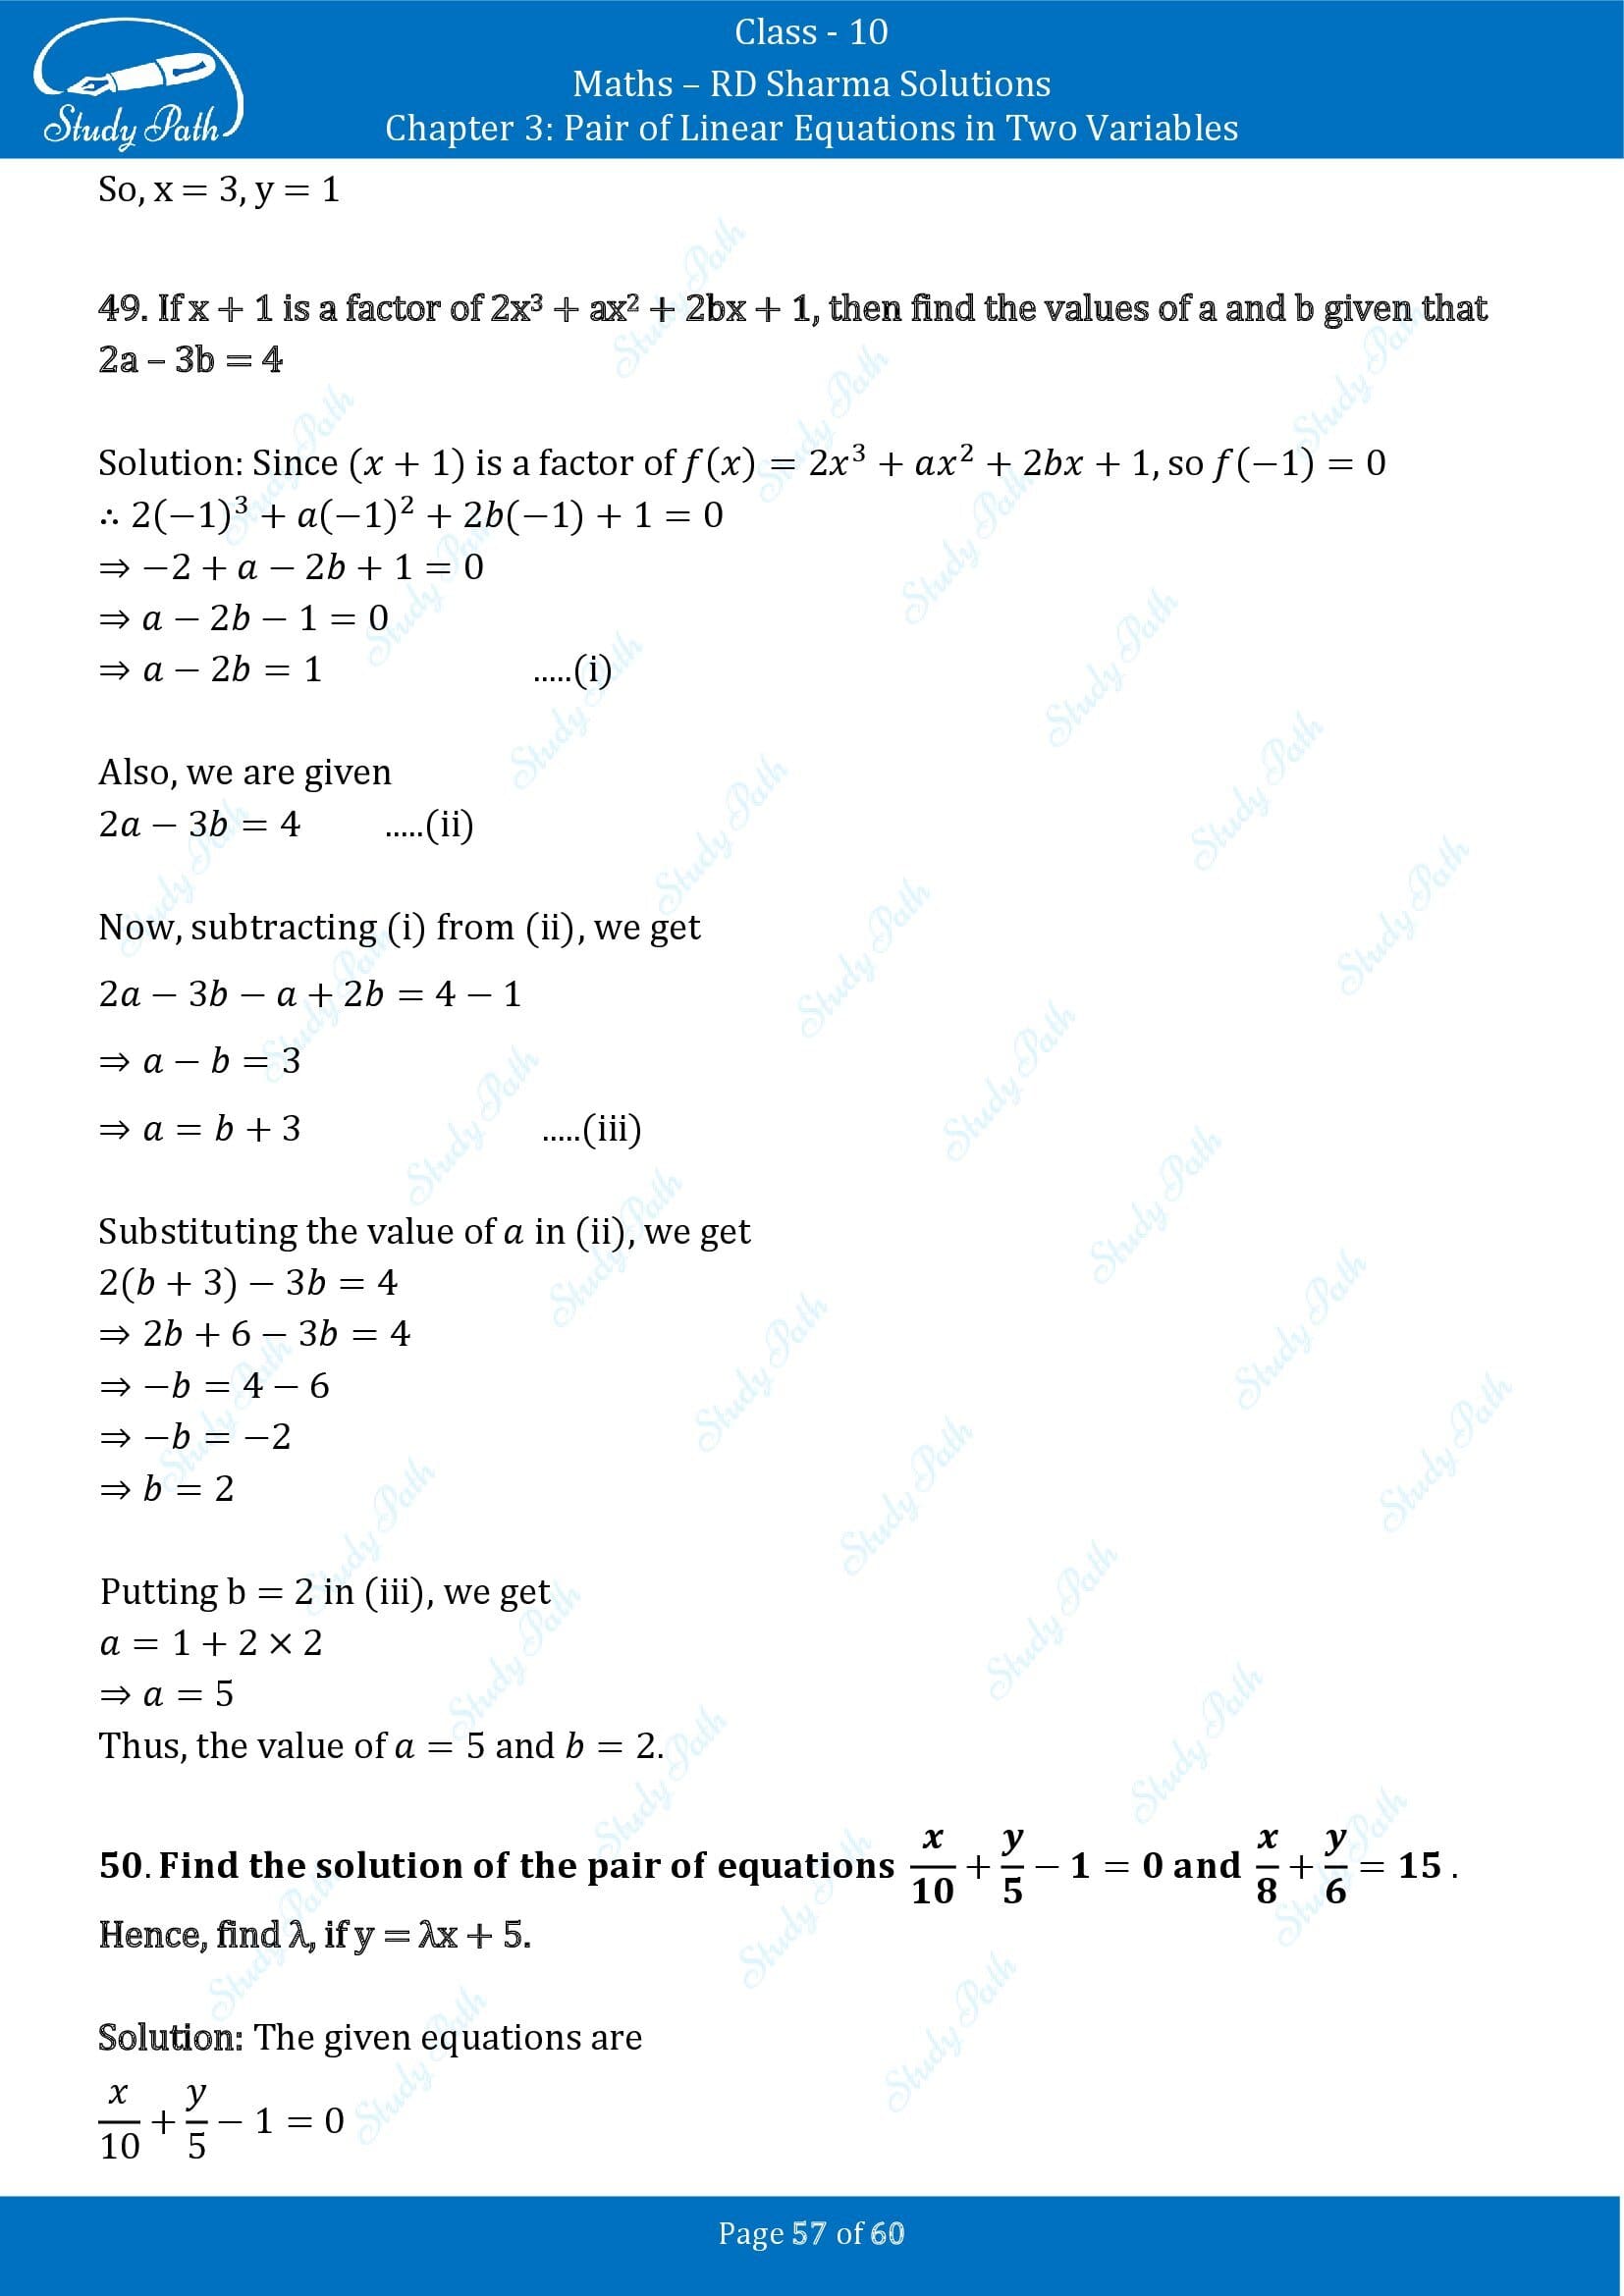 RD Sharma Solutions Class 10 Chapter 3 Pair of Linear Equations in Two Variables Exercise 3.3 00057